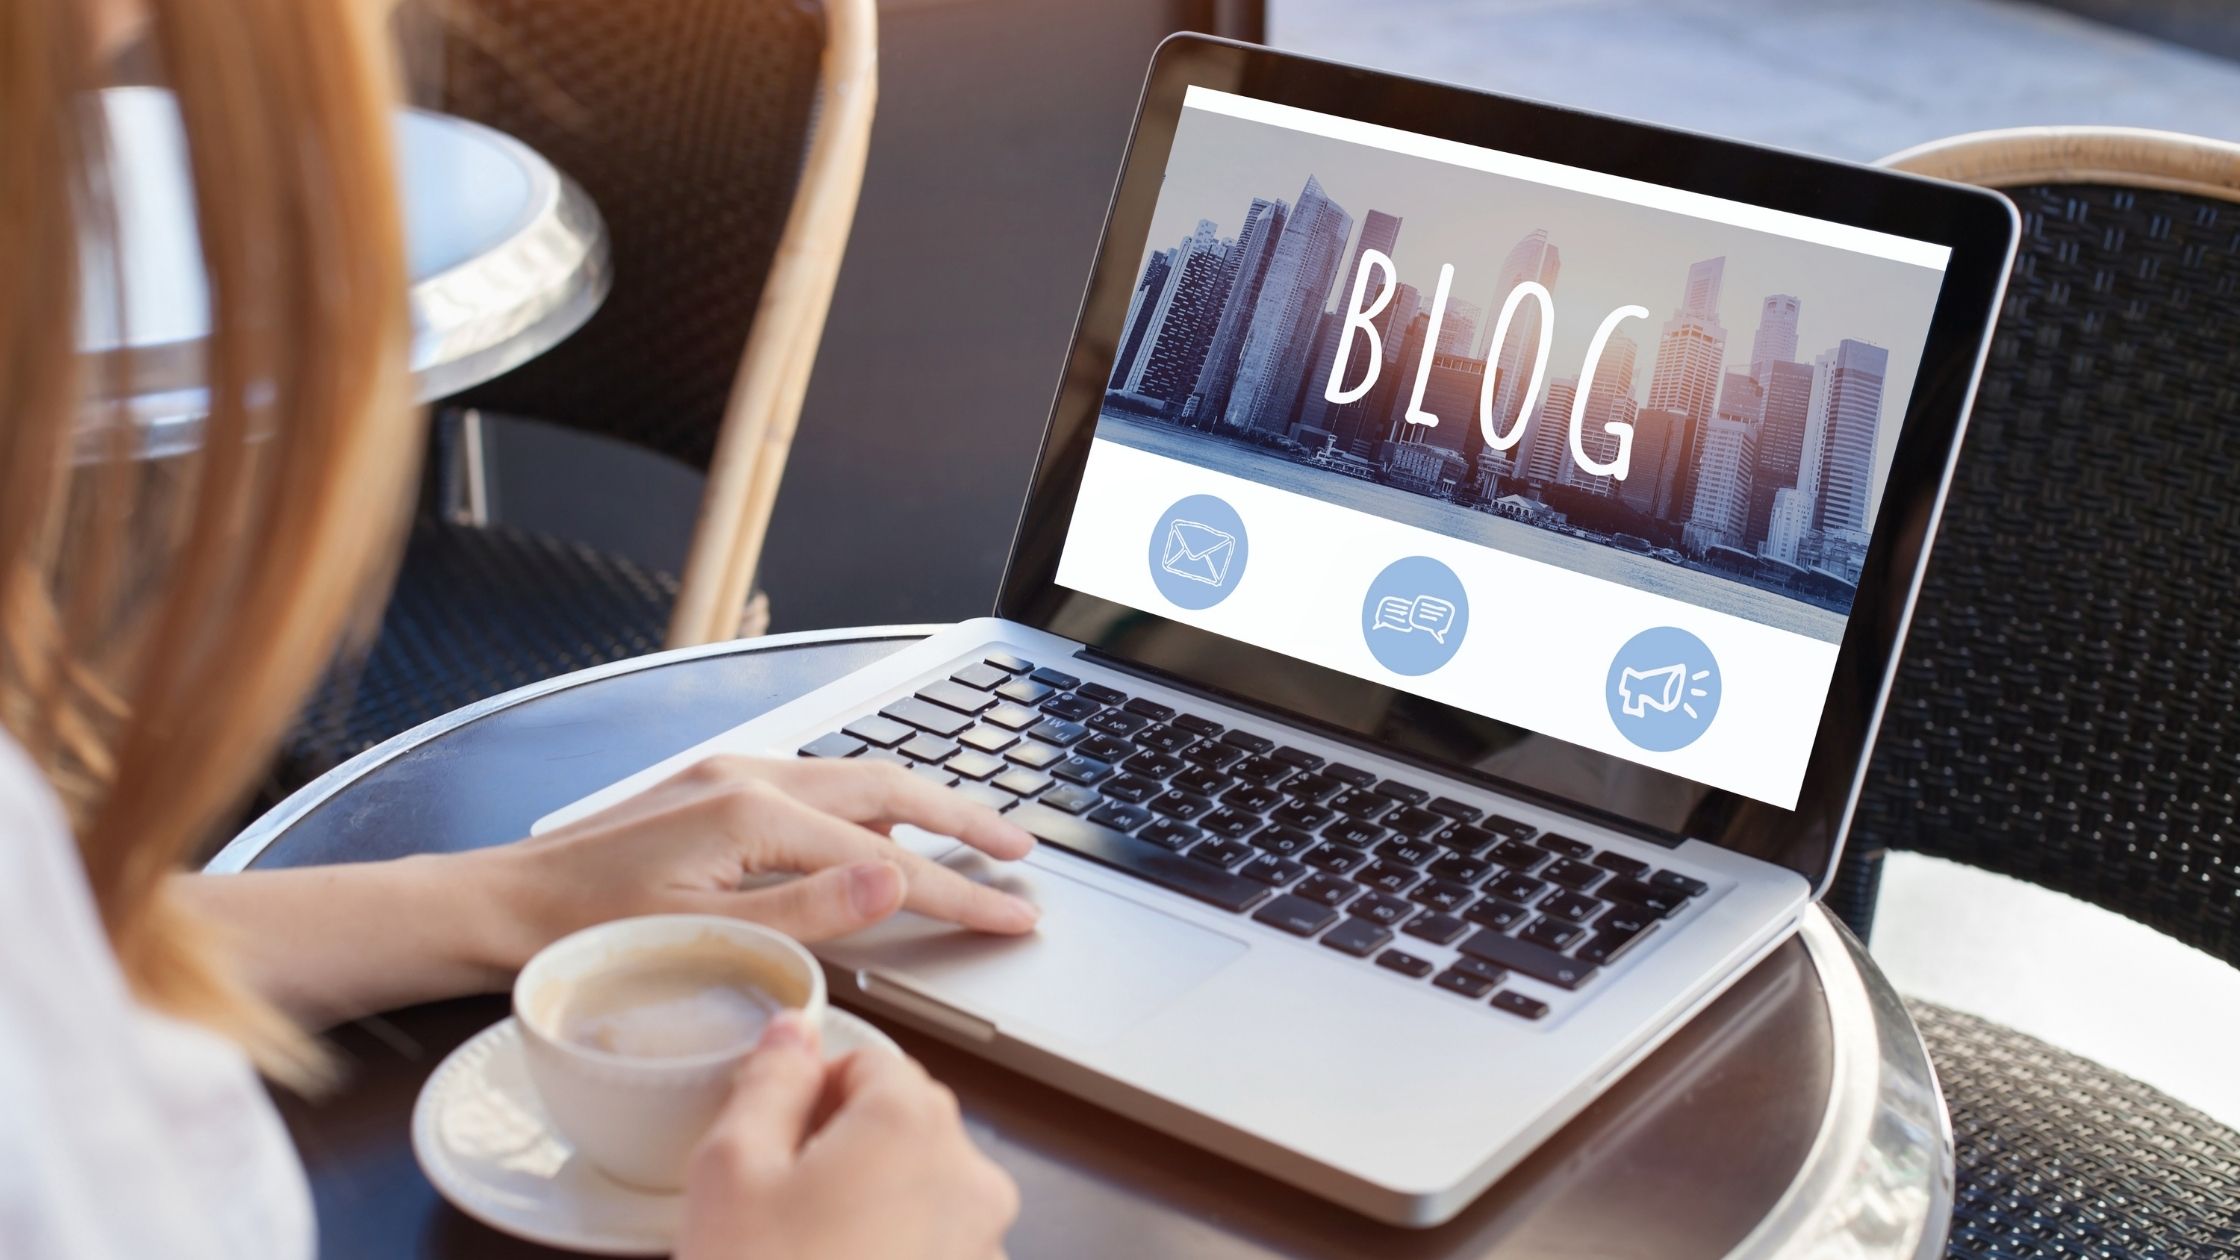 blogging is one of the best business ideas for housewives 